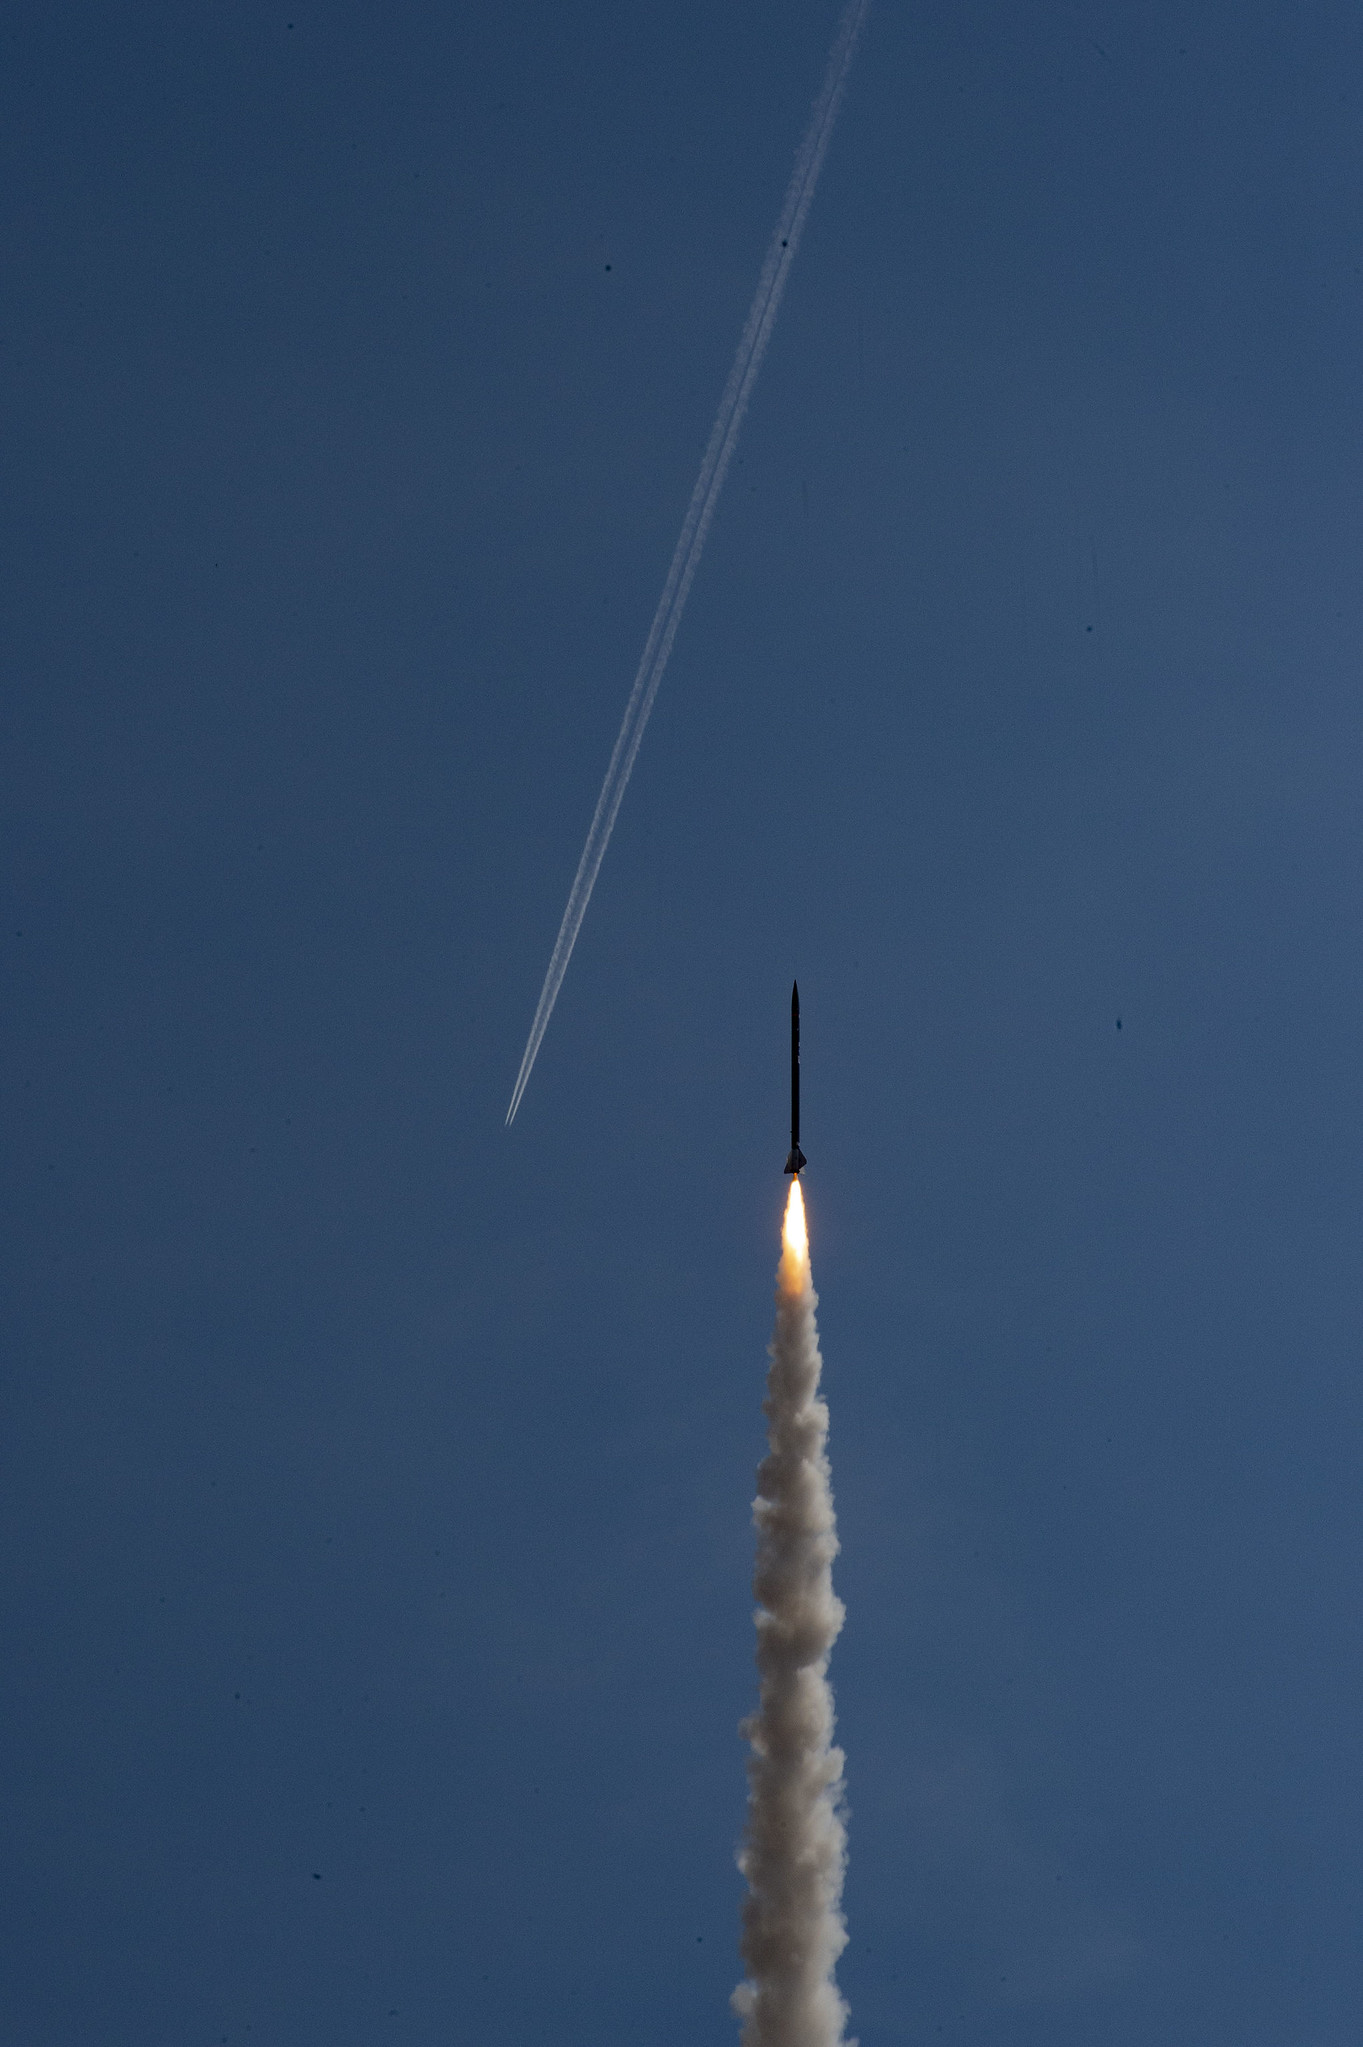 High-powered amateur rocket launches